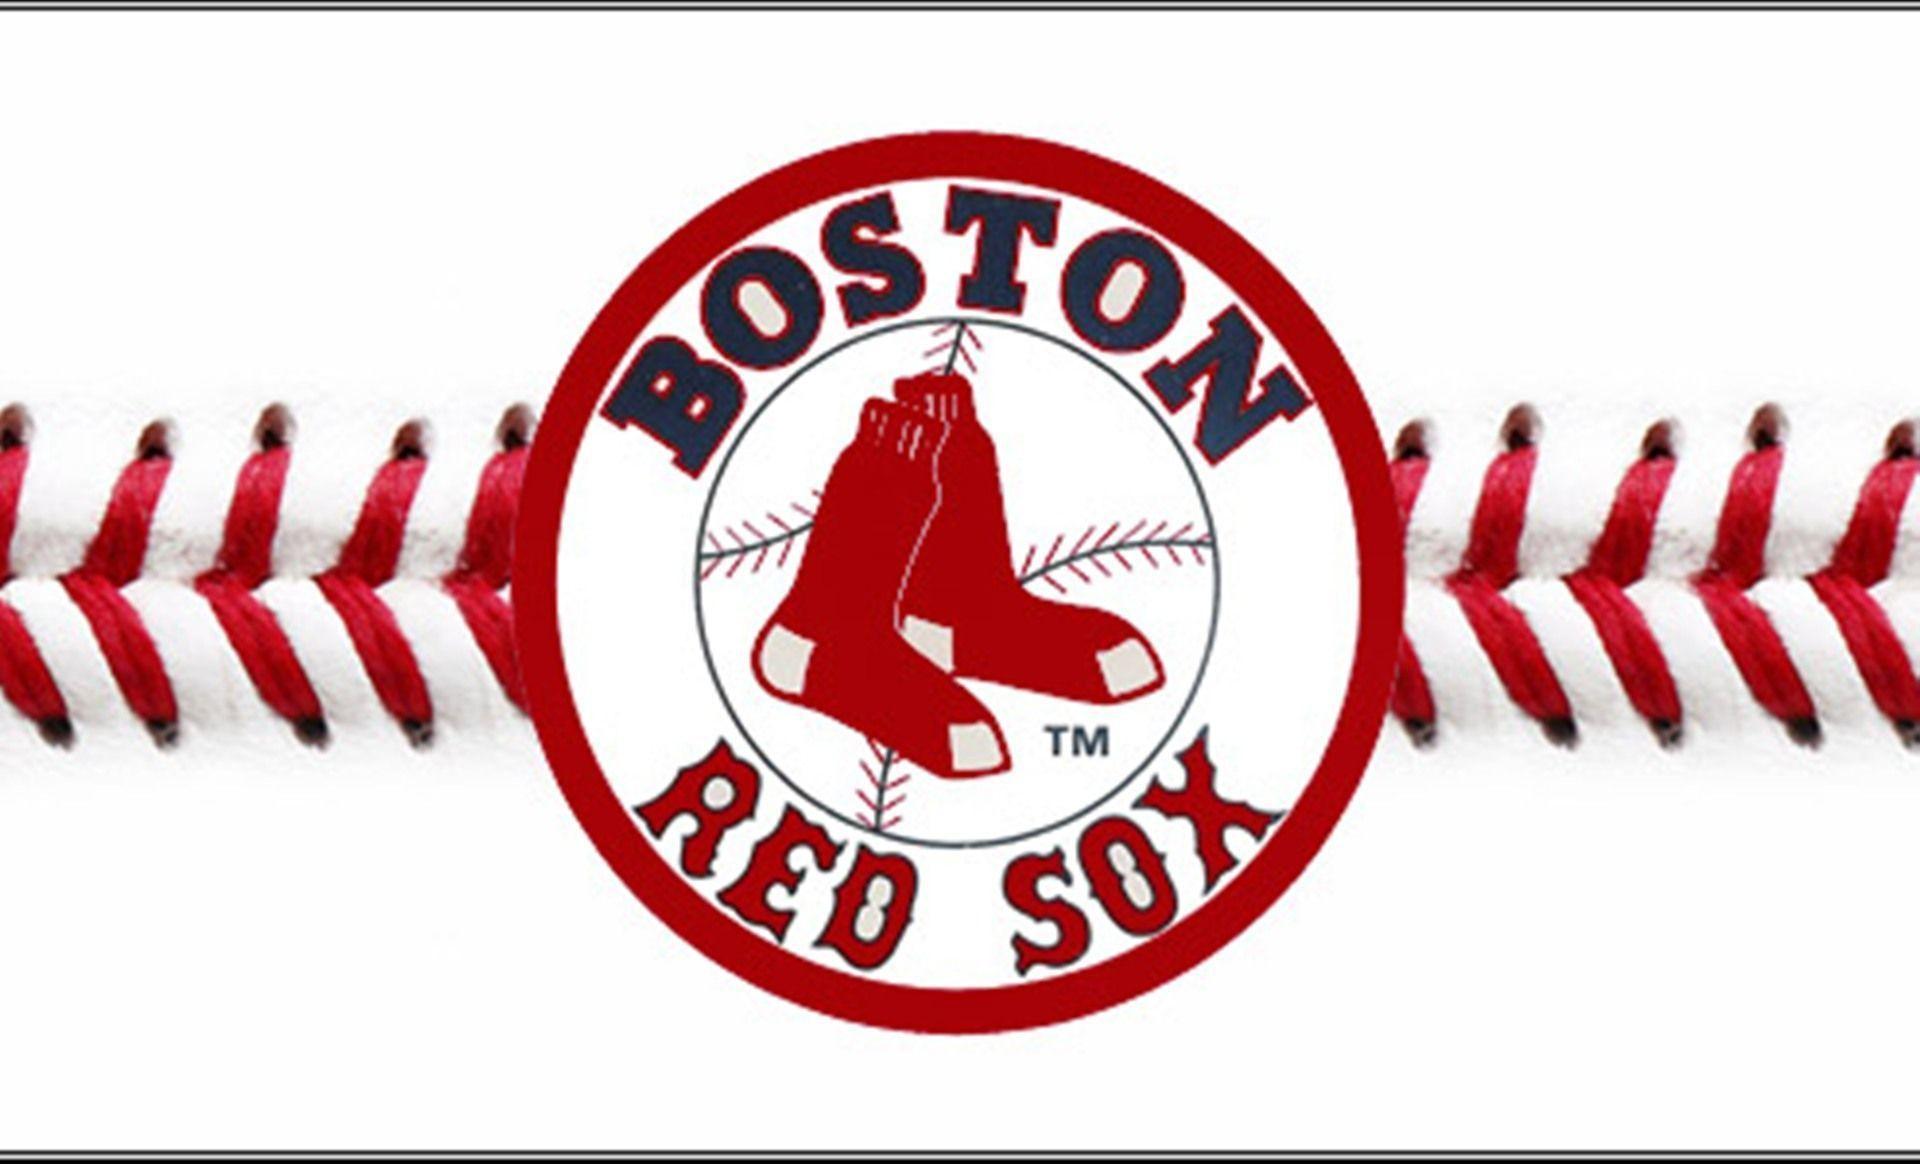 Boston Red Sox Logo Wallpapers Wallpaper Cave